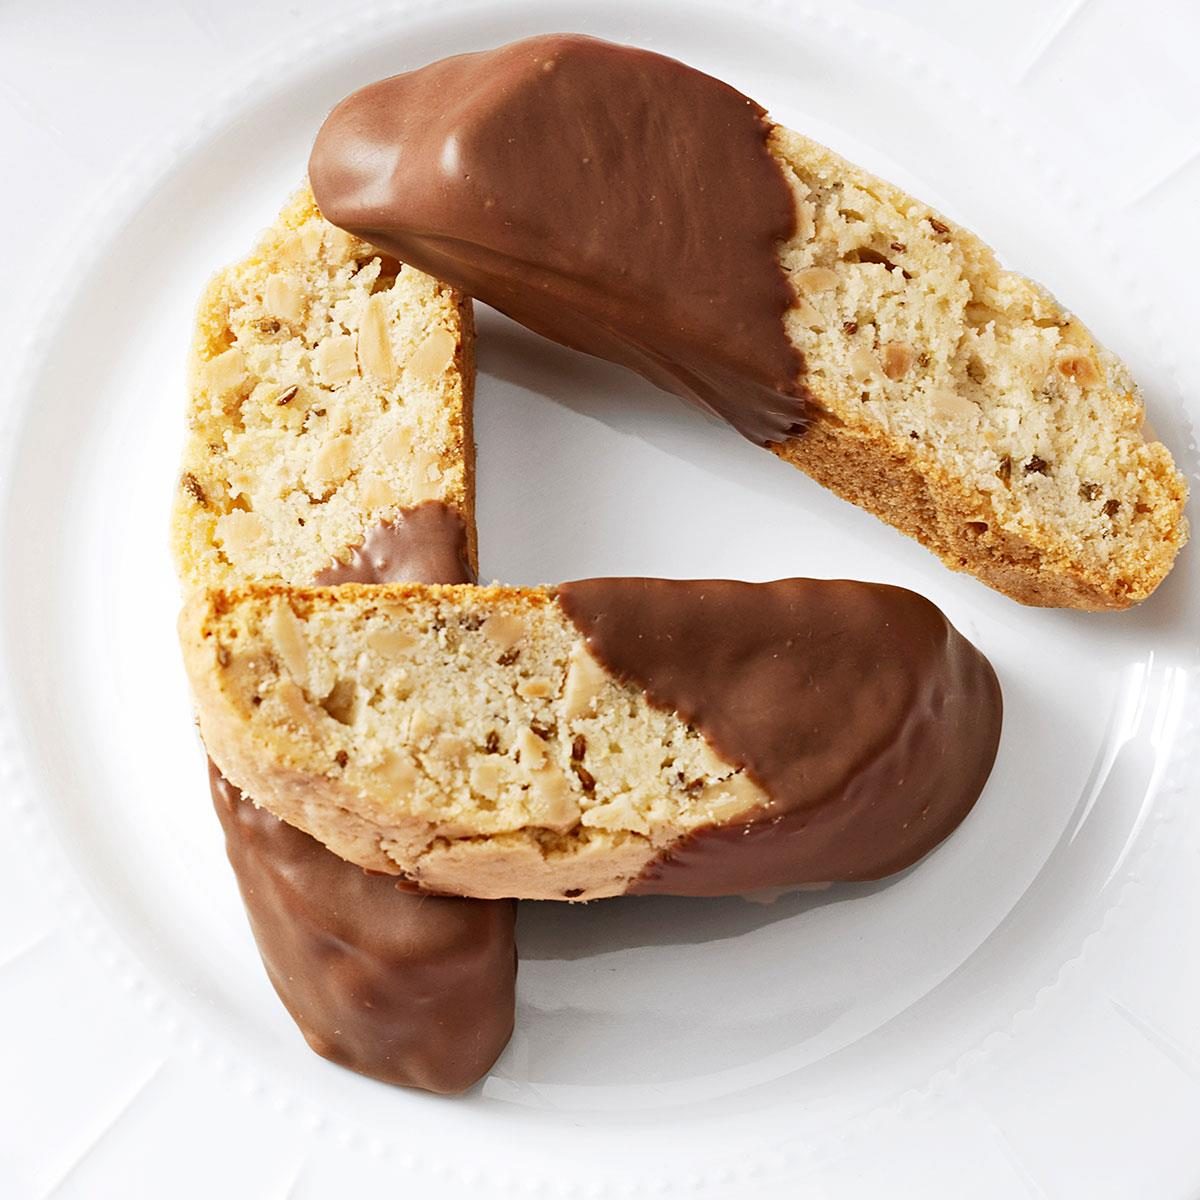 Chocolate-Dipped Anise Biscotti